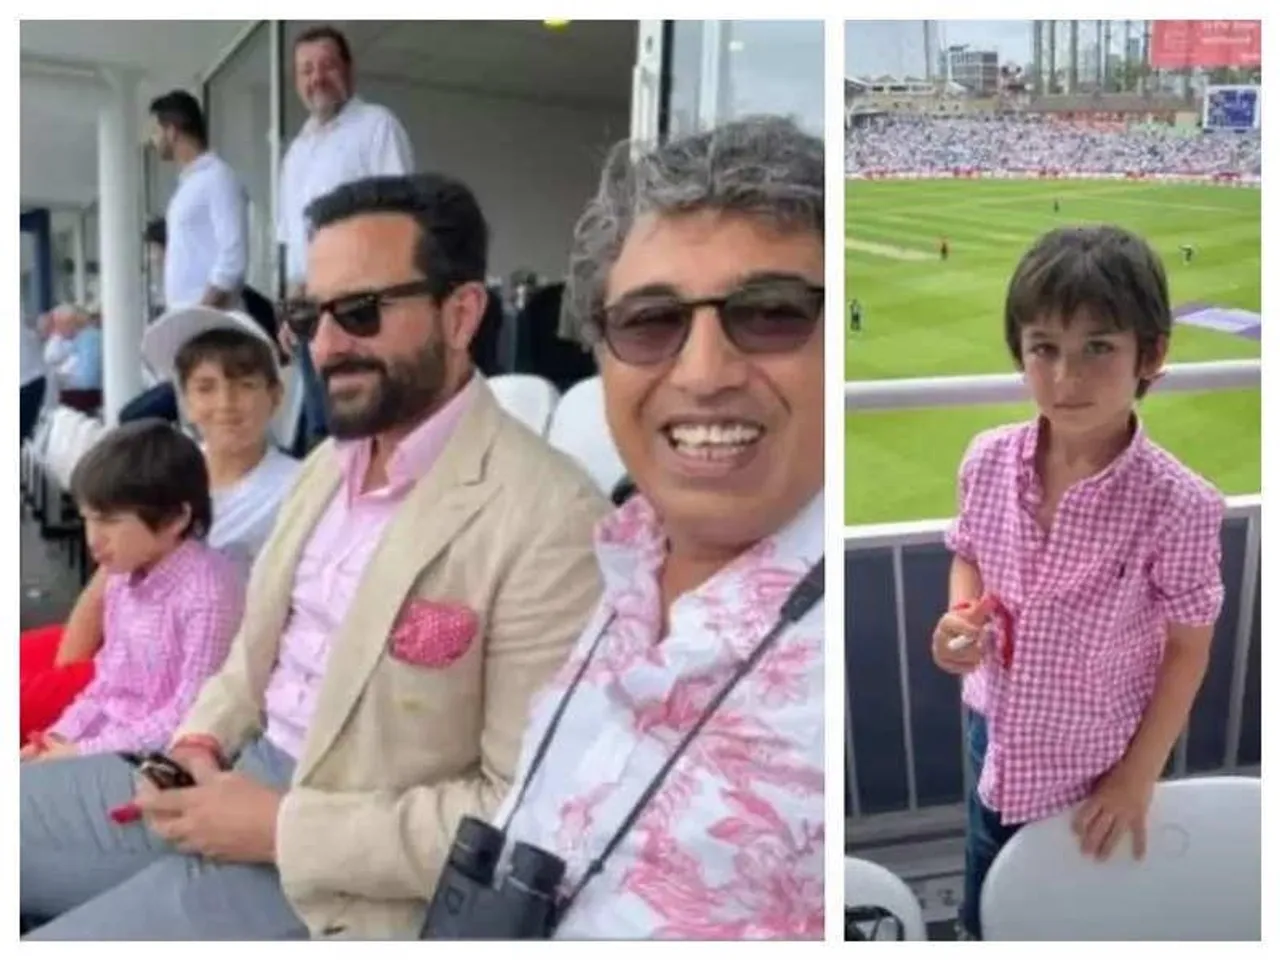 Kareena Kapoor Khan posts Taimur’s ‘first’ cricket outing from London as he attends India vs England match